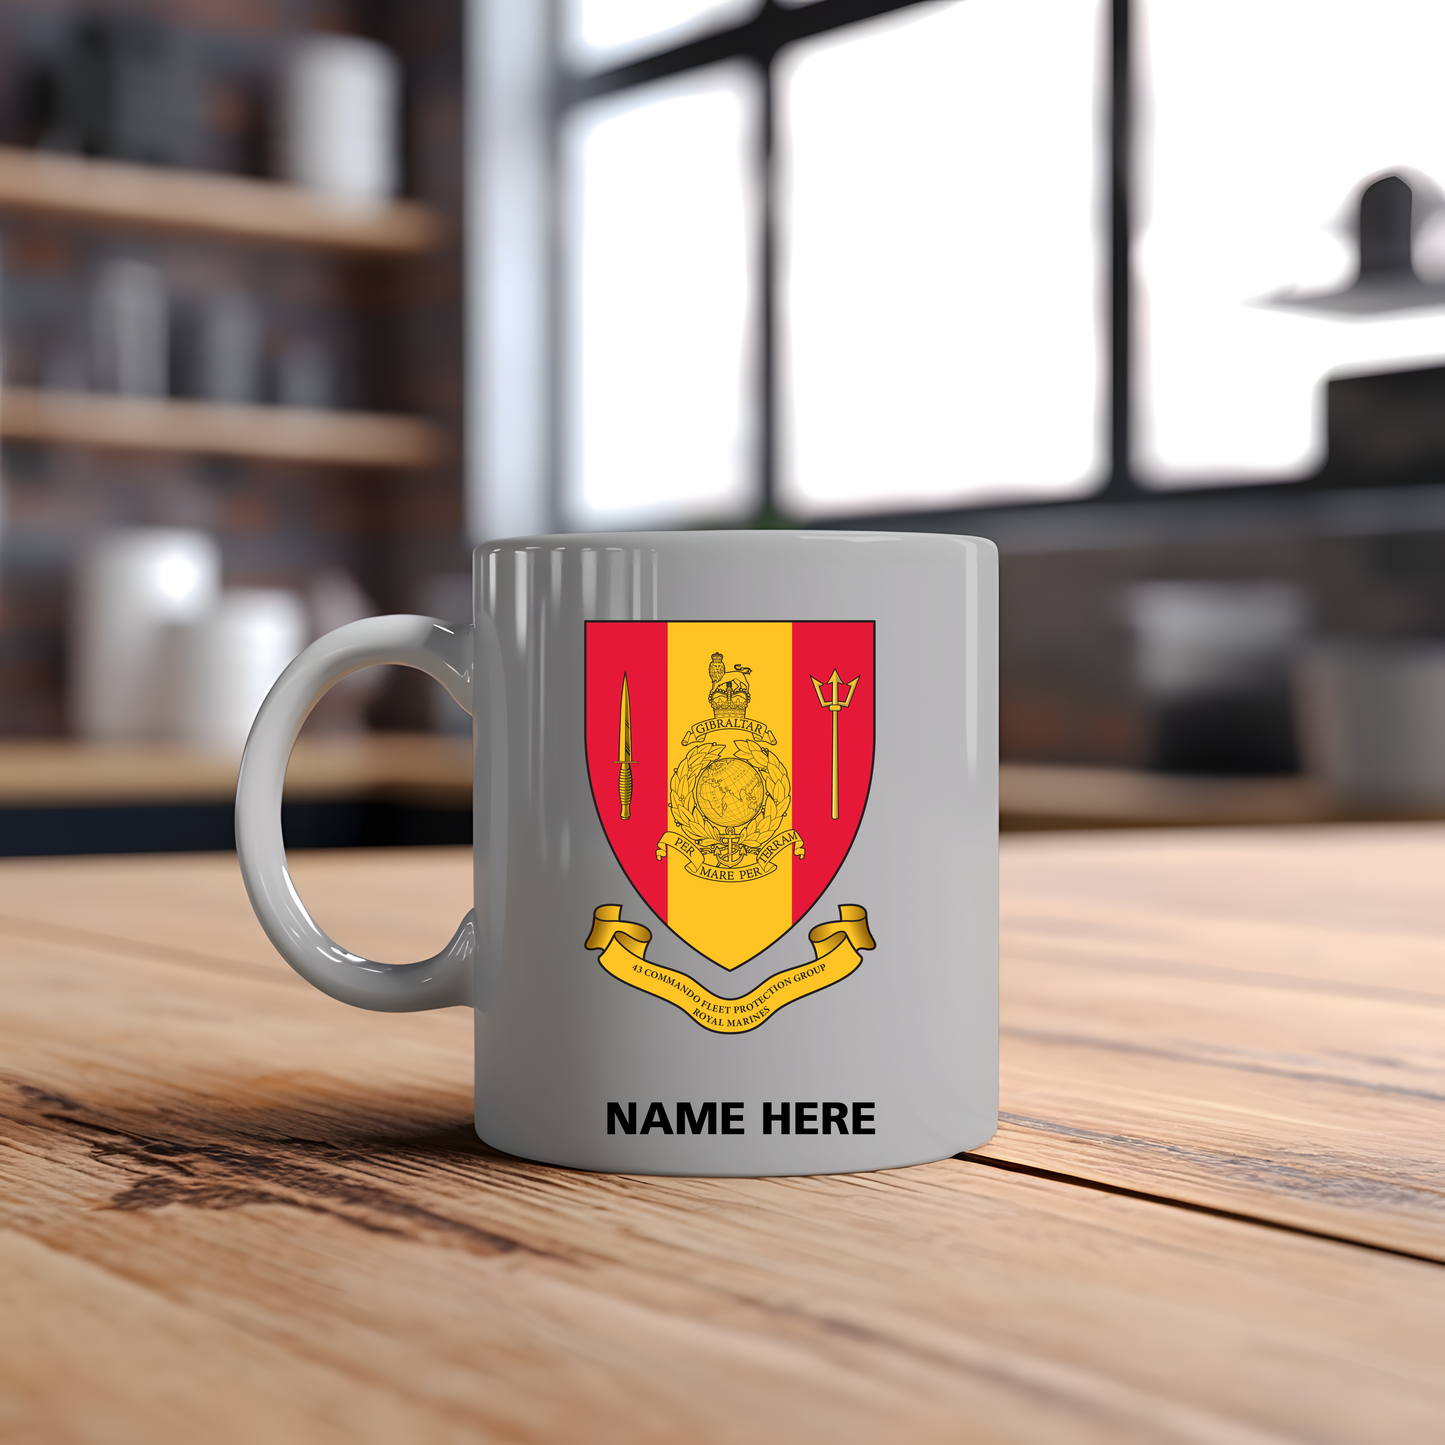 Royal Marines Mugs (All Crests Available)